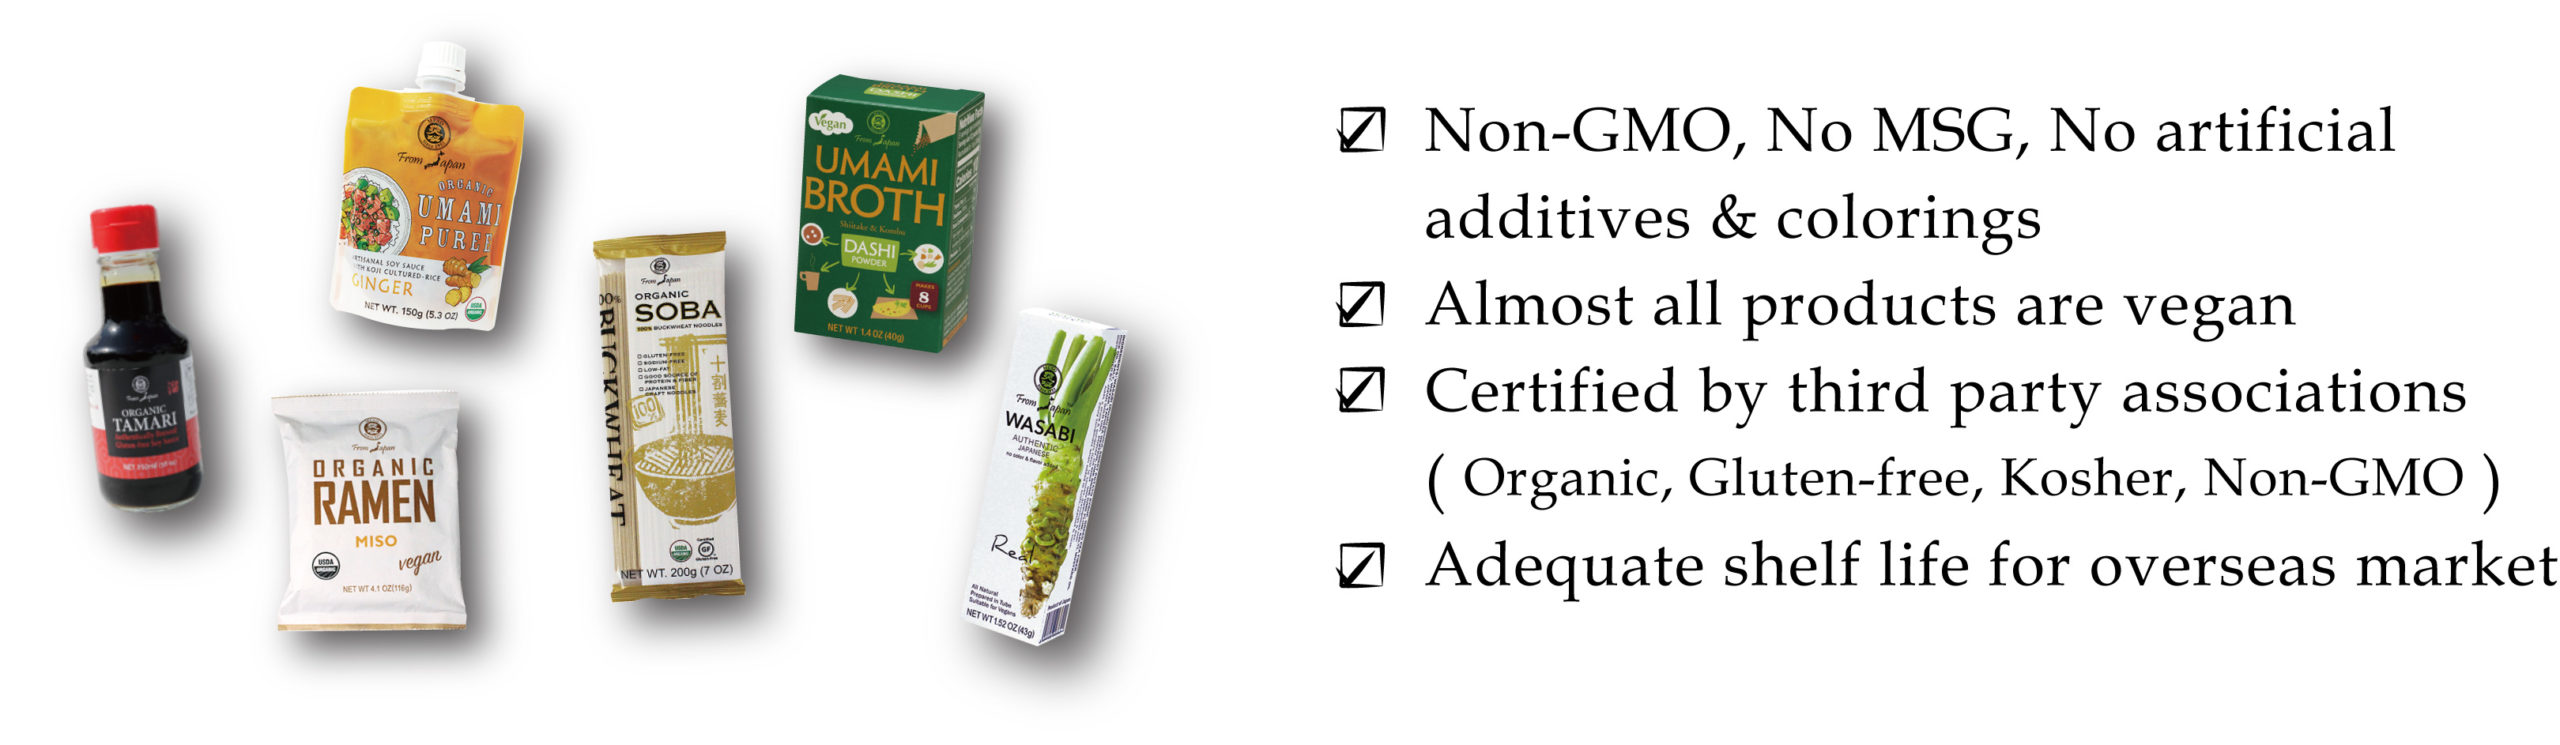 Non-GMO, No MSG, No artificial additives & colorings Almost all products are vegan Certified by third party associations ( Organic, Gluten-free, Kosher, Non-GMO ) Adequate shelf life for overseas market